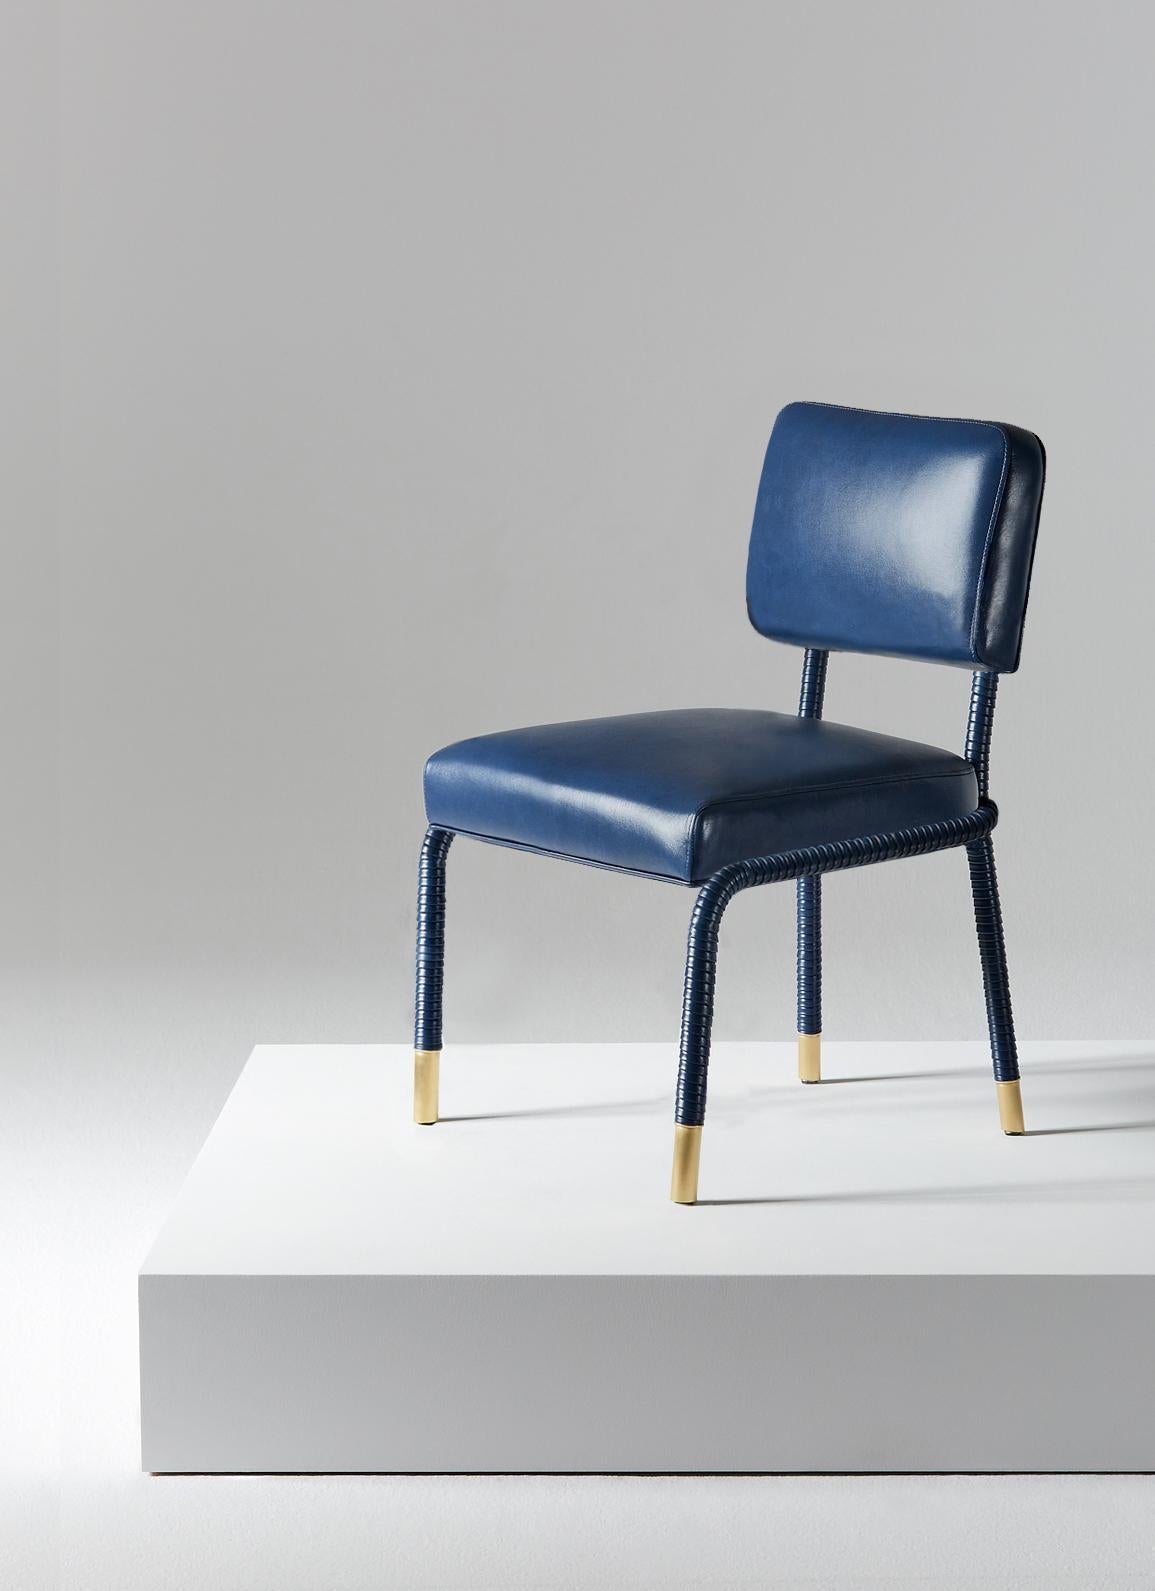 And Objects, product design studio founded by Martin Brudnizki and Nick Jeanes based in London.

The Easton side chair is uniquely crafted from stainless steel and Italian leather. Hand-wrapped leather cloaks a tubular frame ending with brass accent